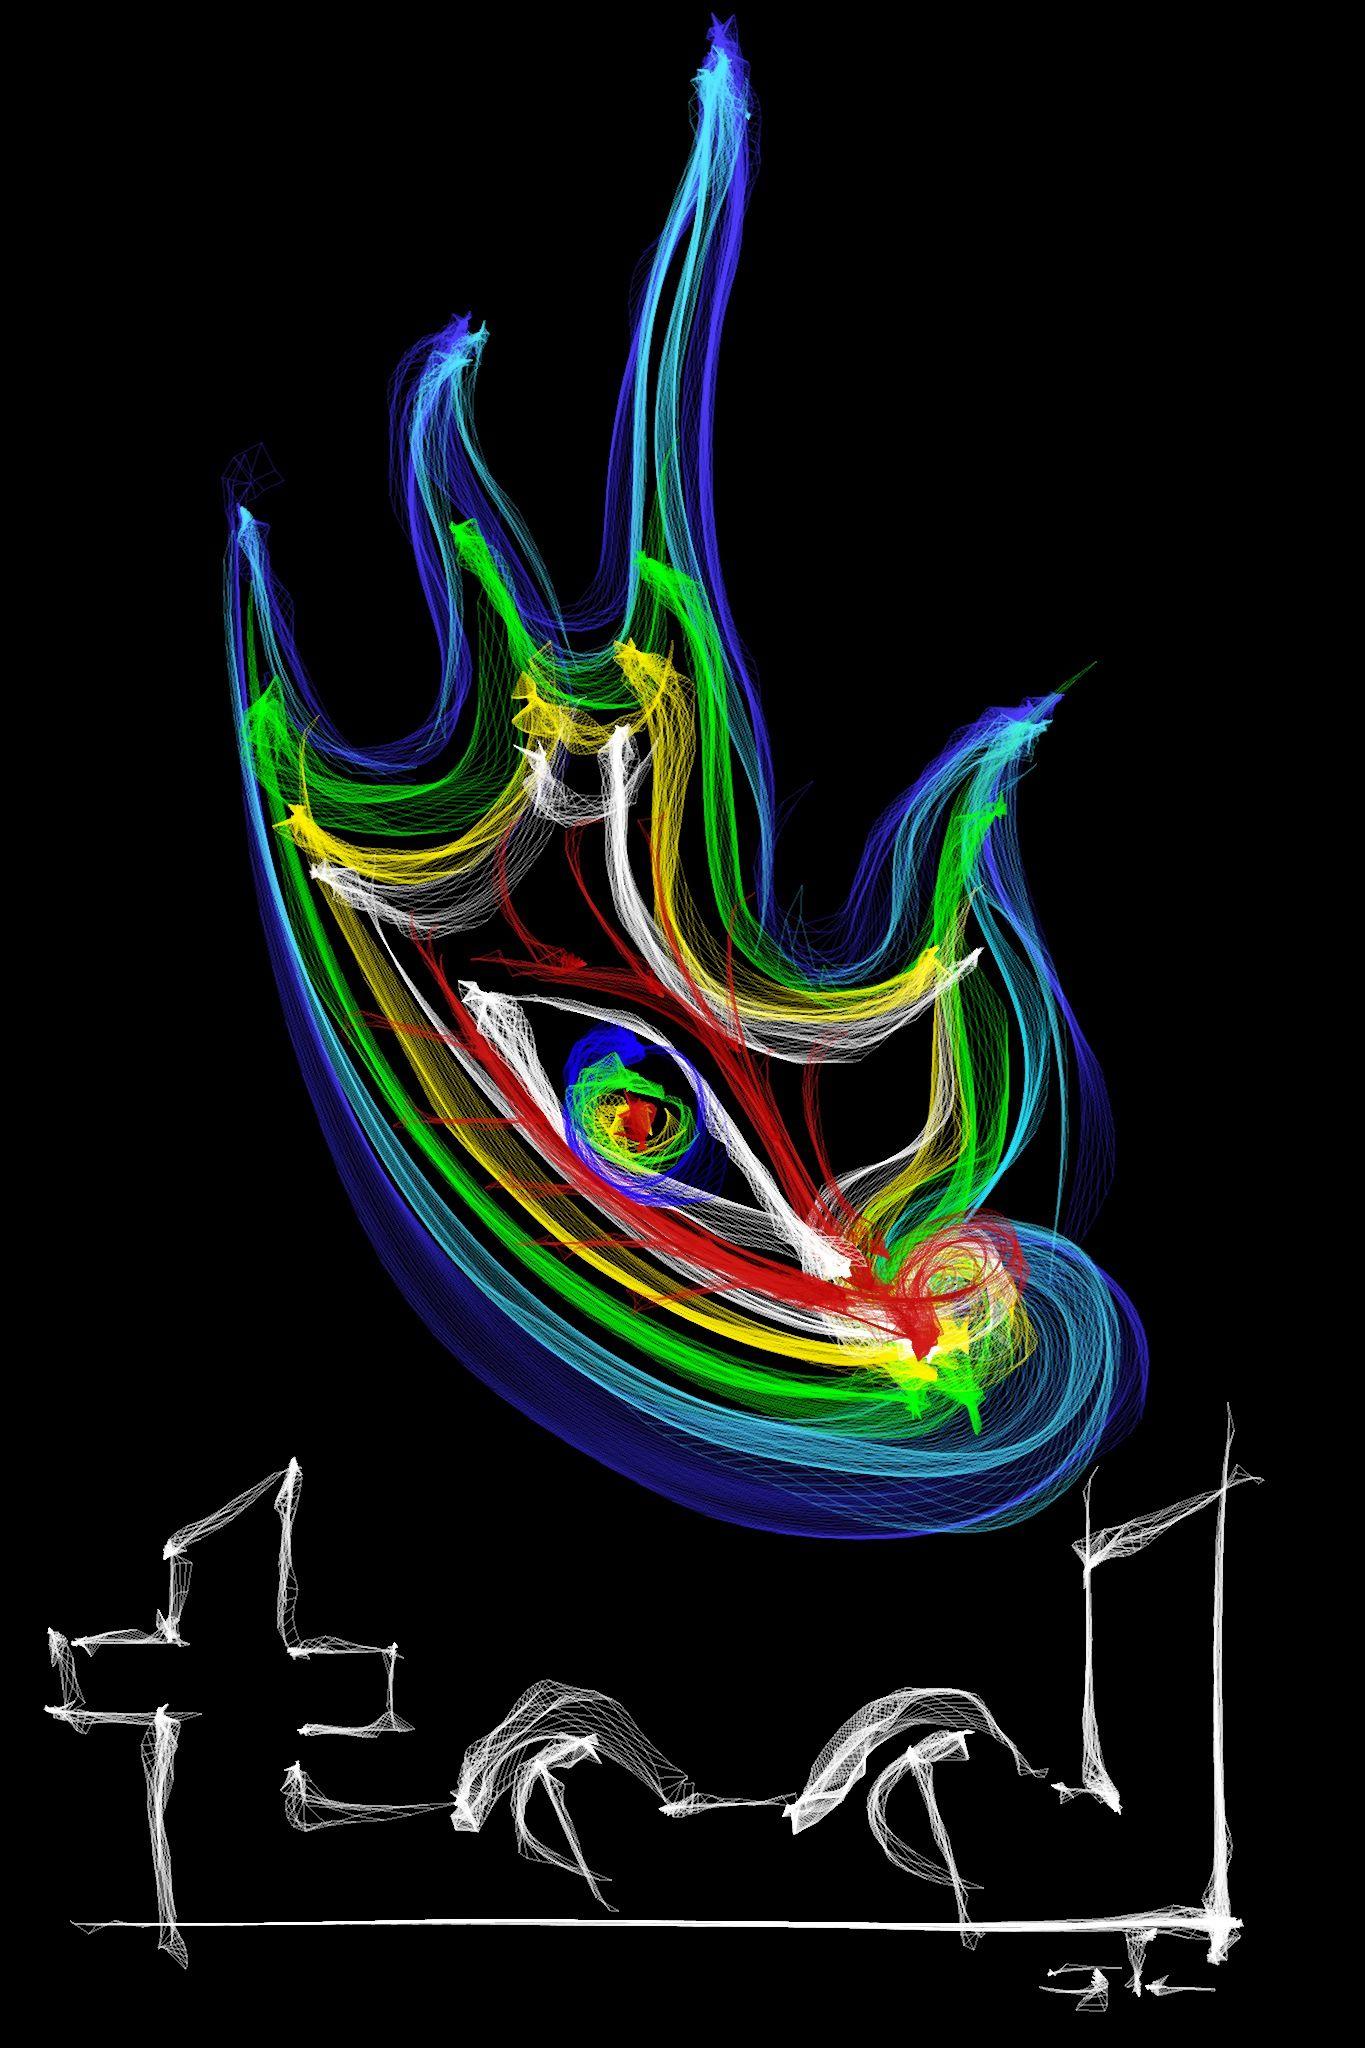 Lateralus more Flowpaper art from me. Tool inspired. Tool band artwork, Tool band art, Tool artwork